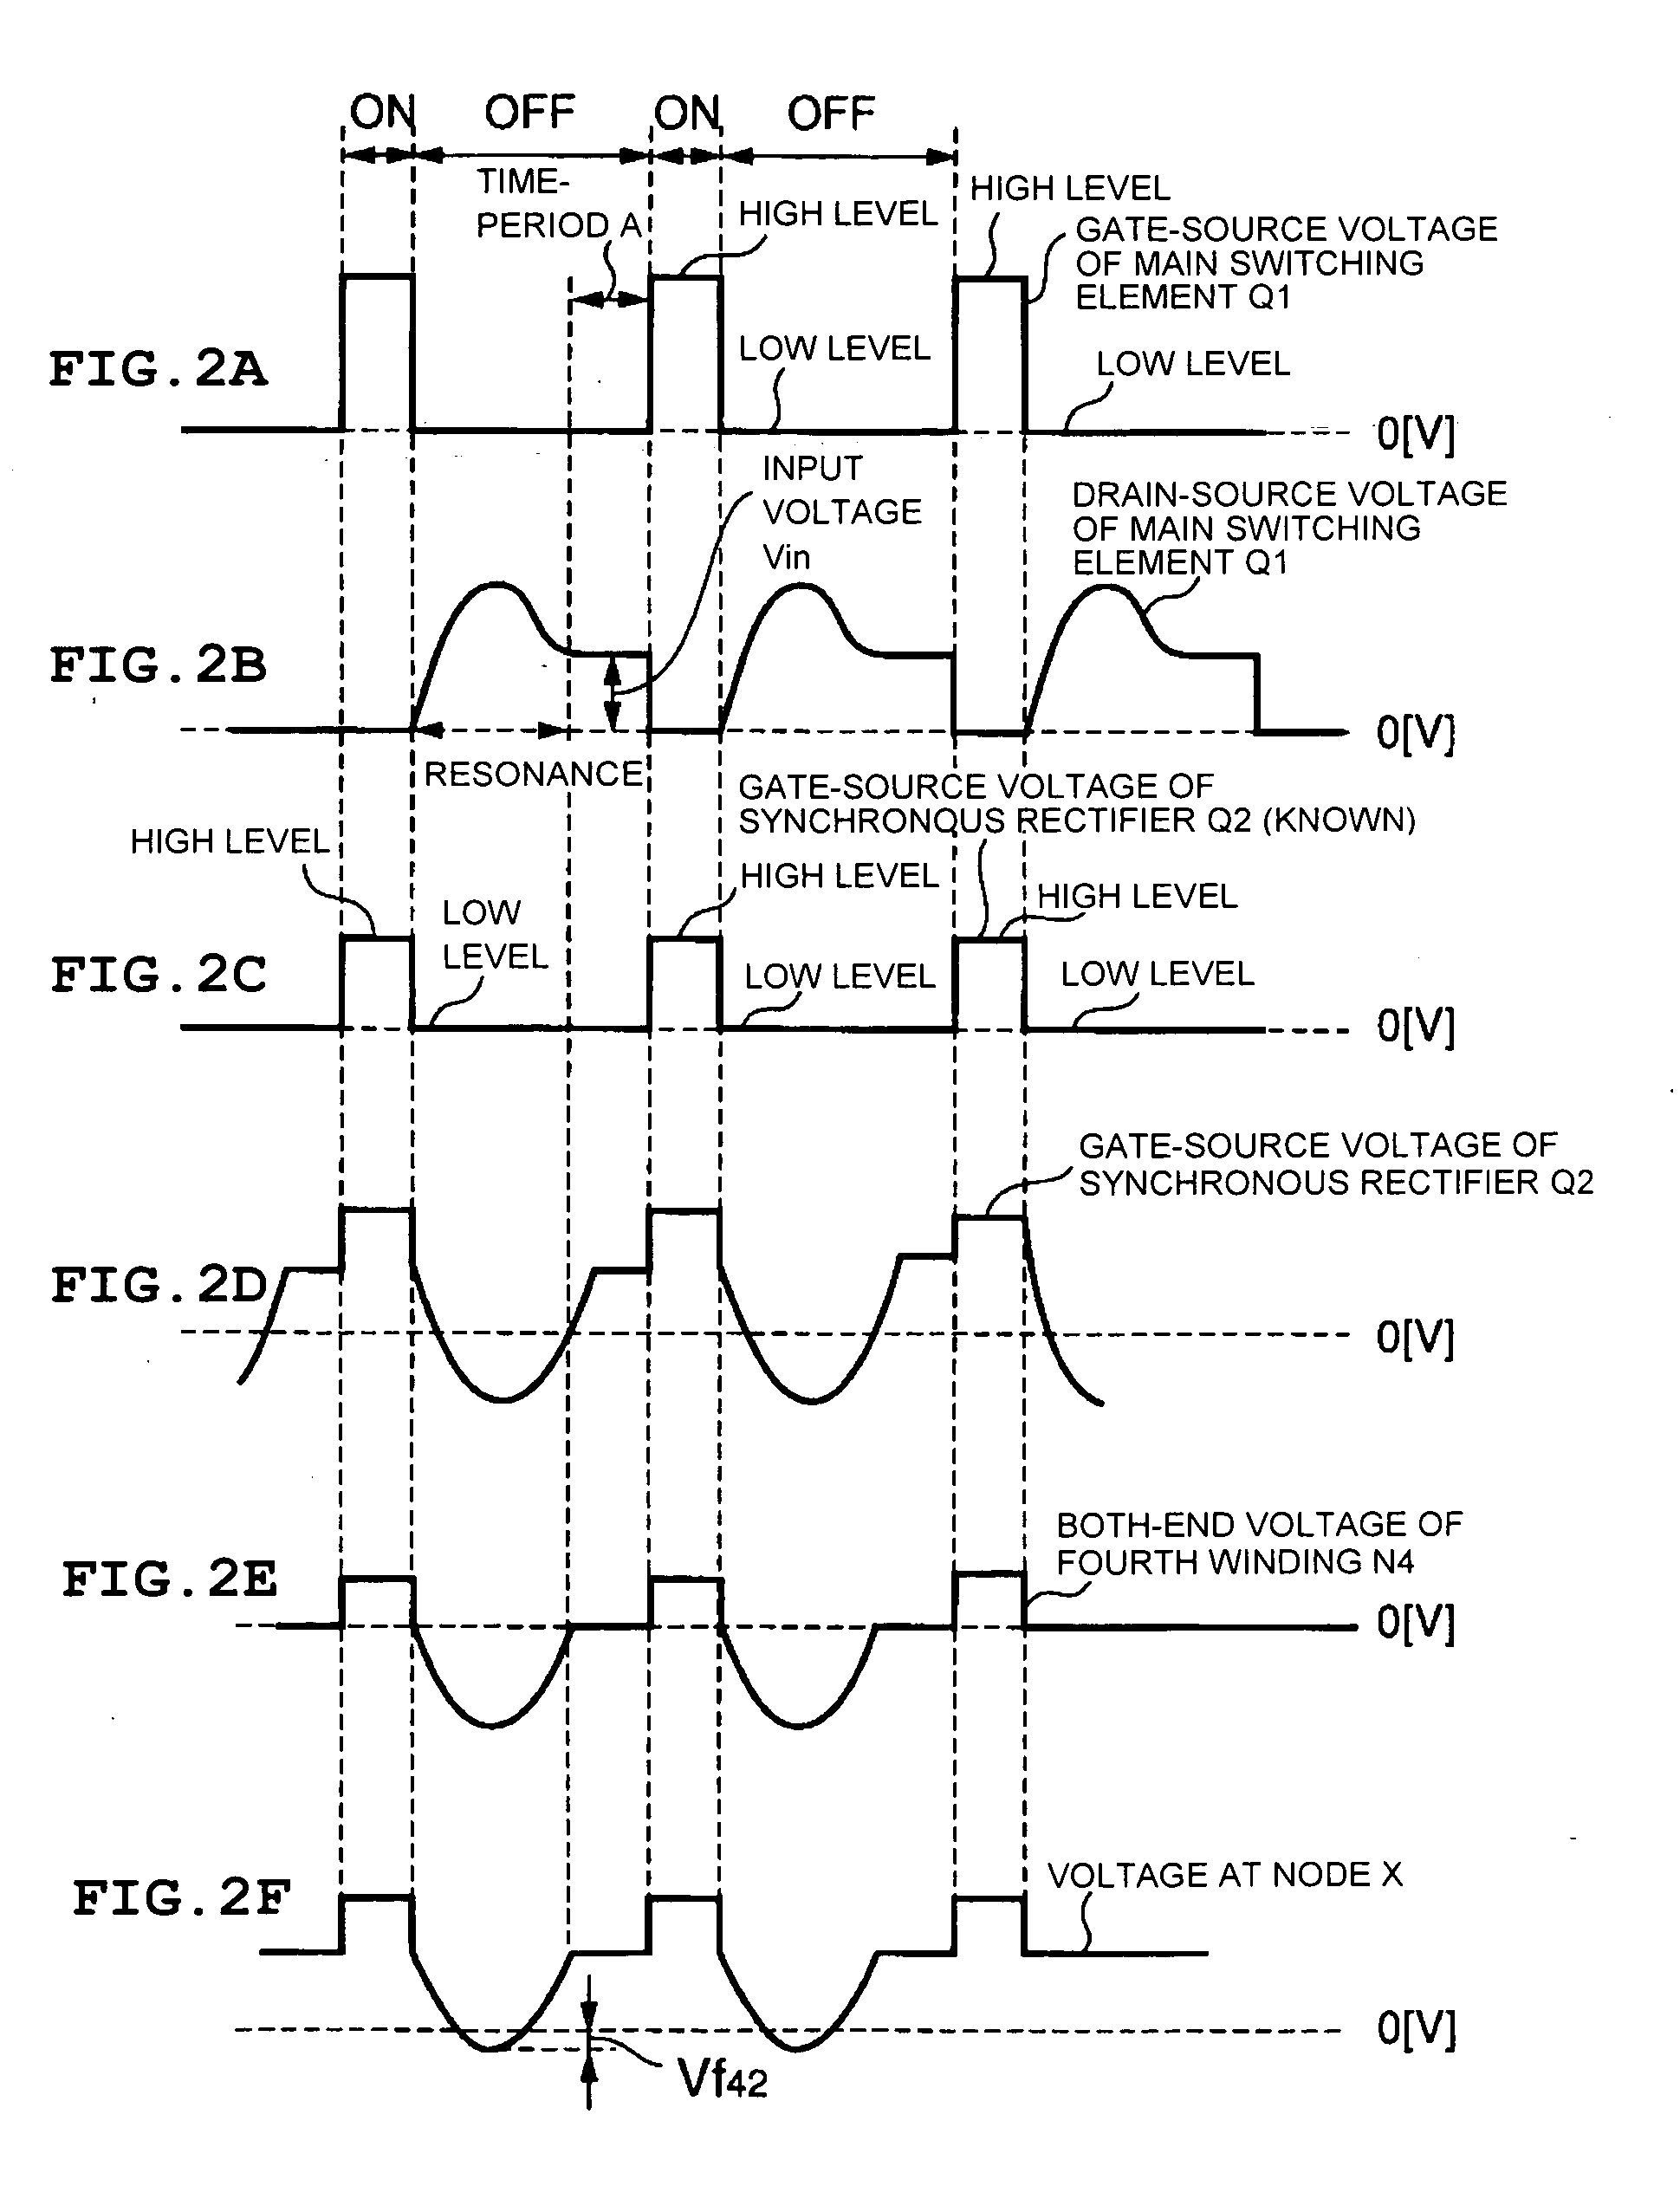 Switching electric source device